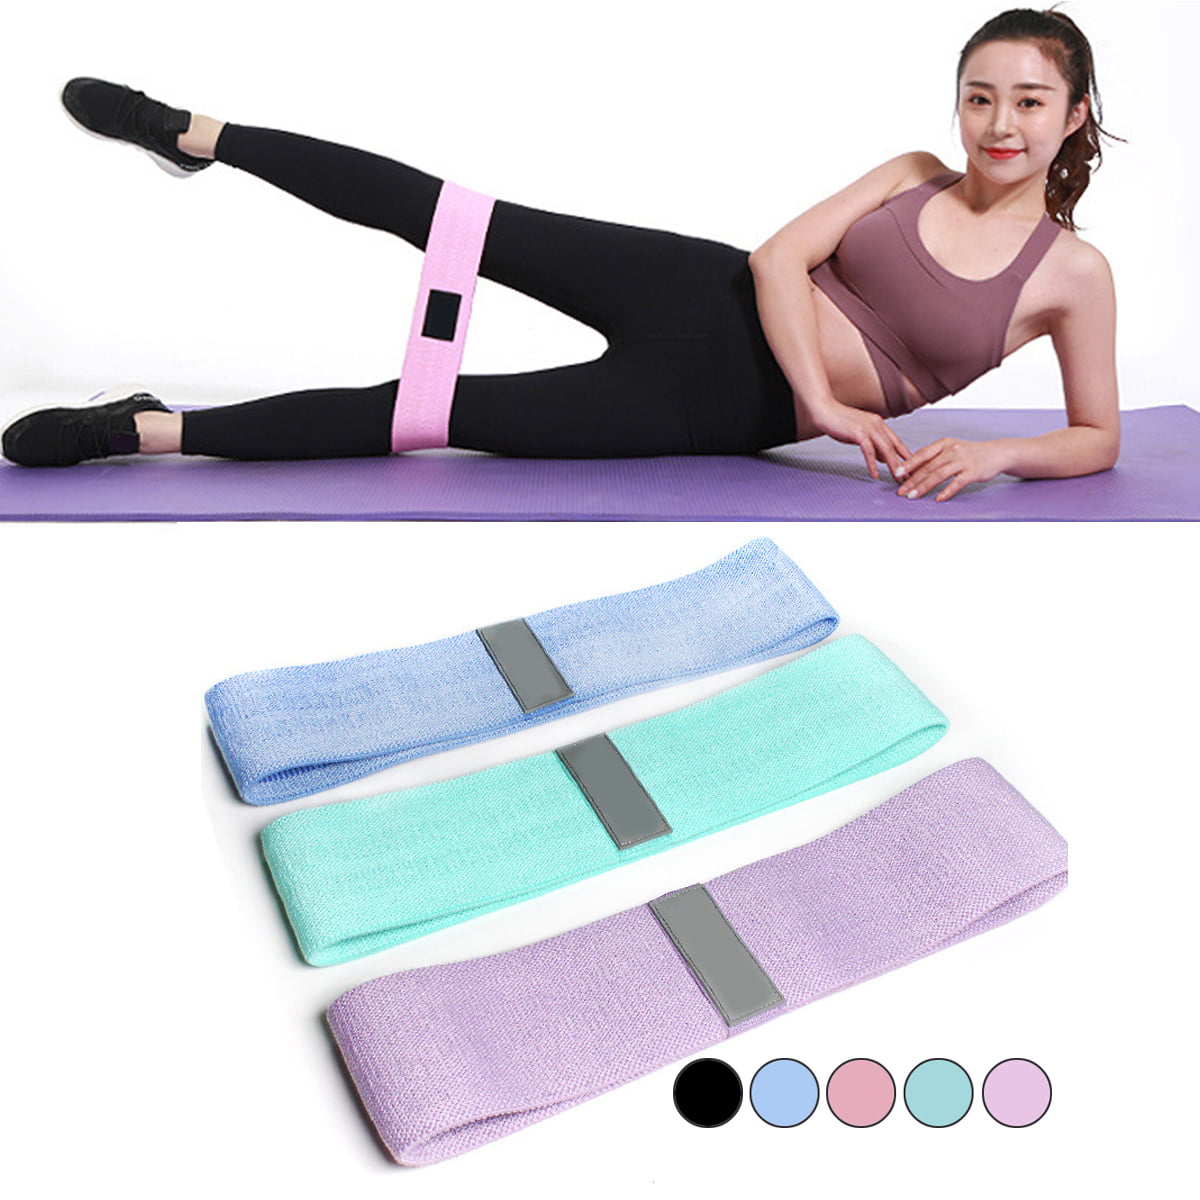 Heavy Non-Slip 40lbs 50lbs Leg Fabric Resistance Band For Glute Hip Butt 